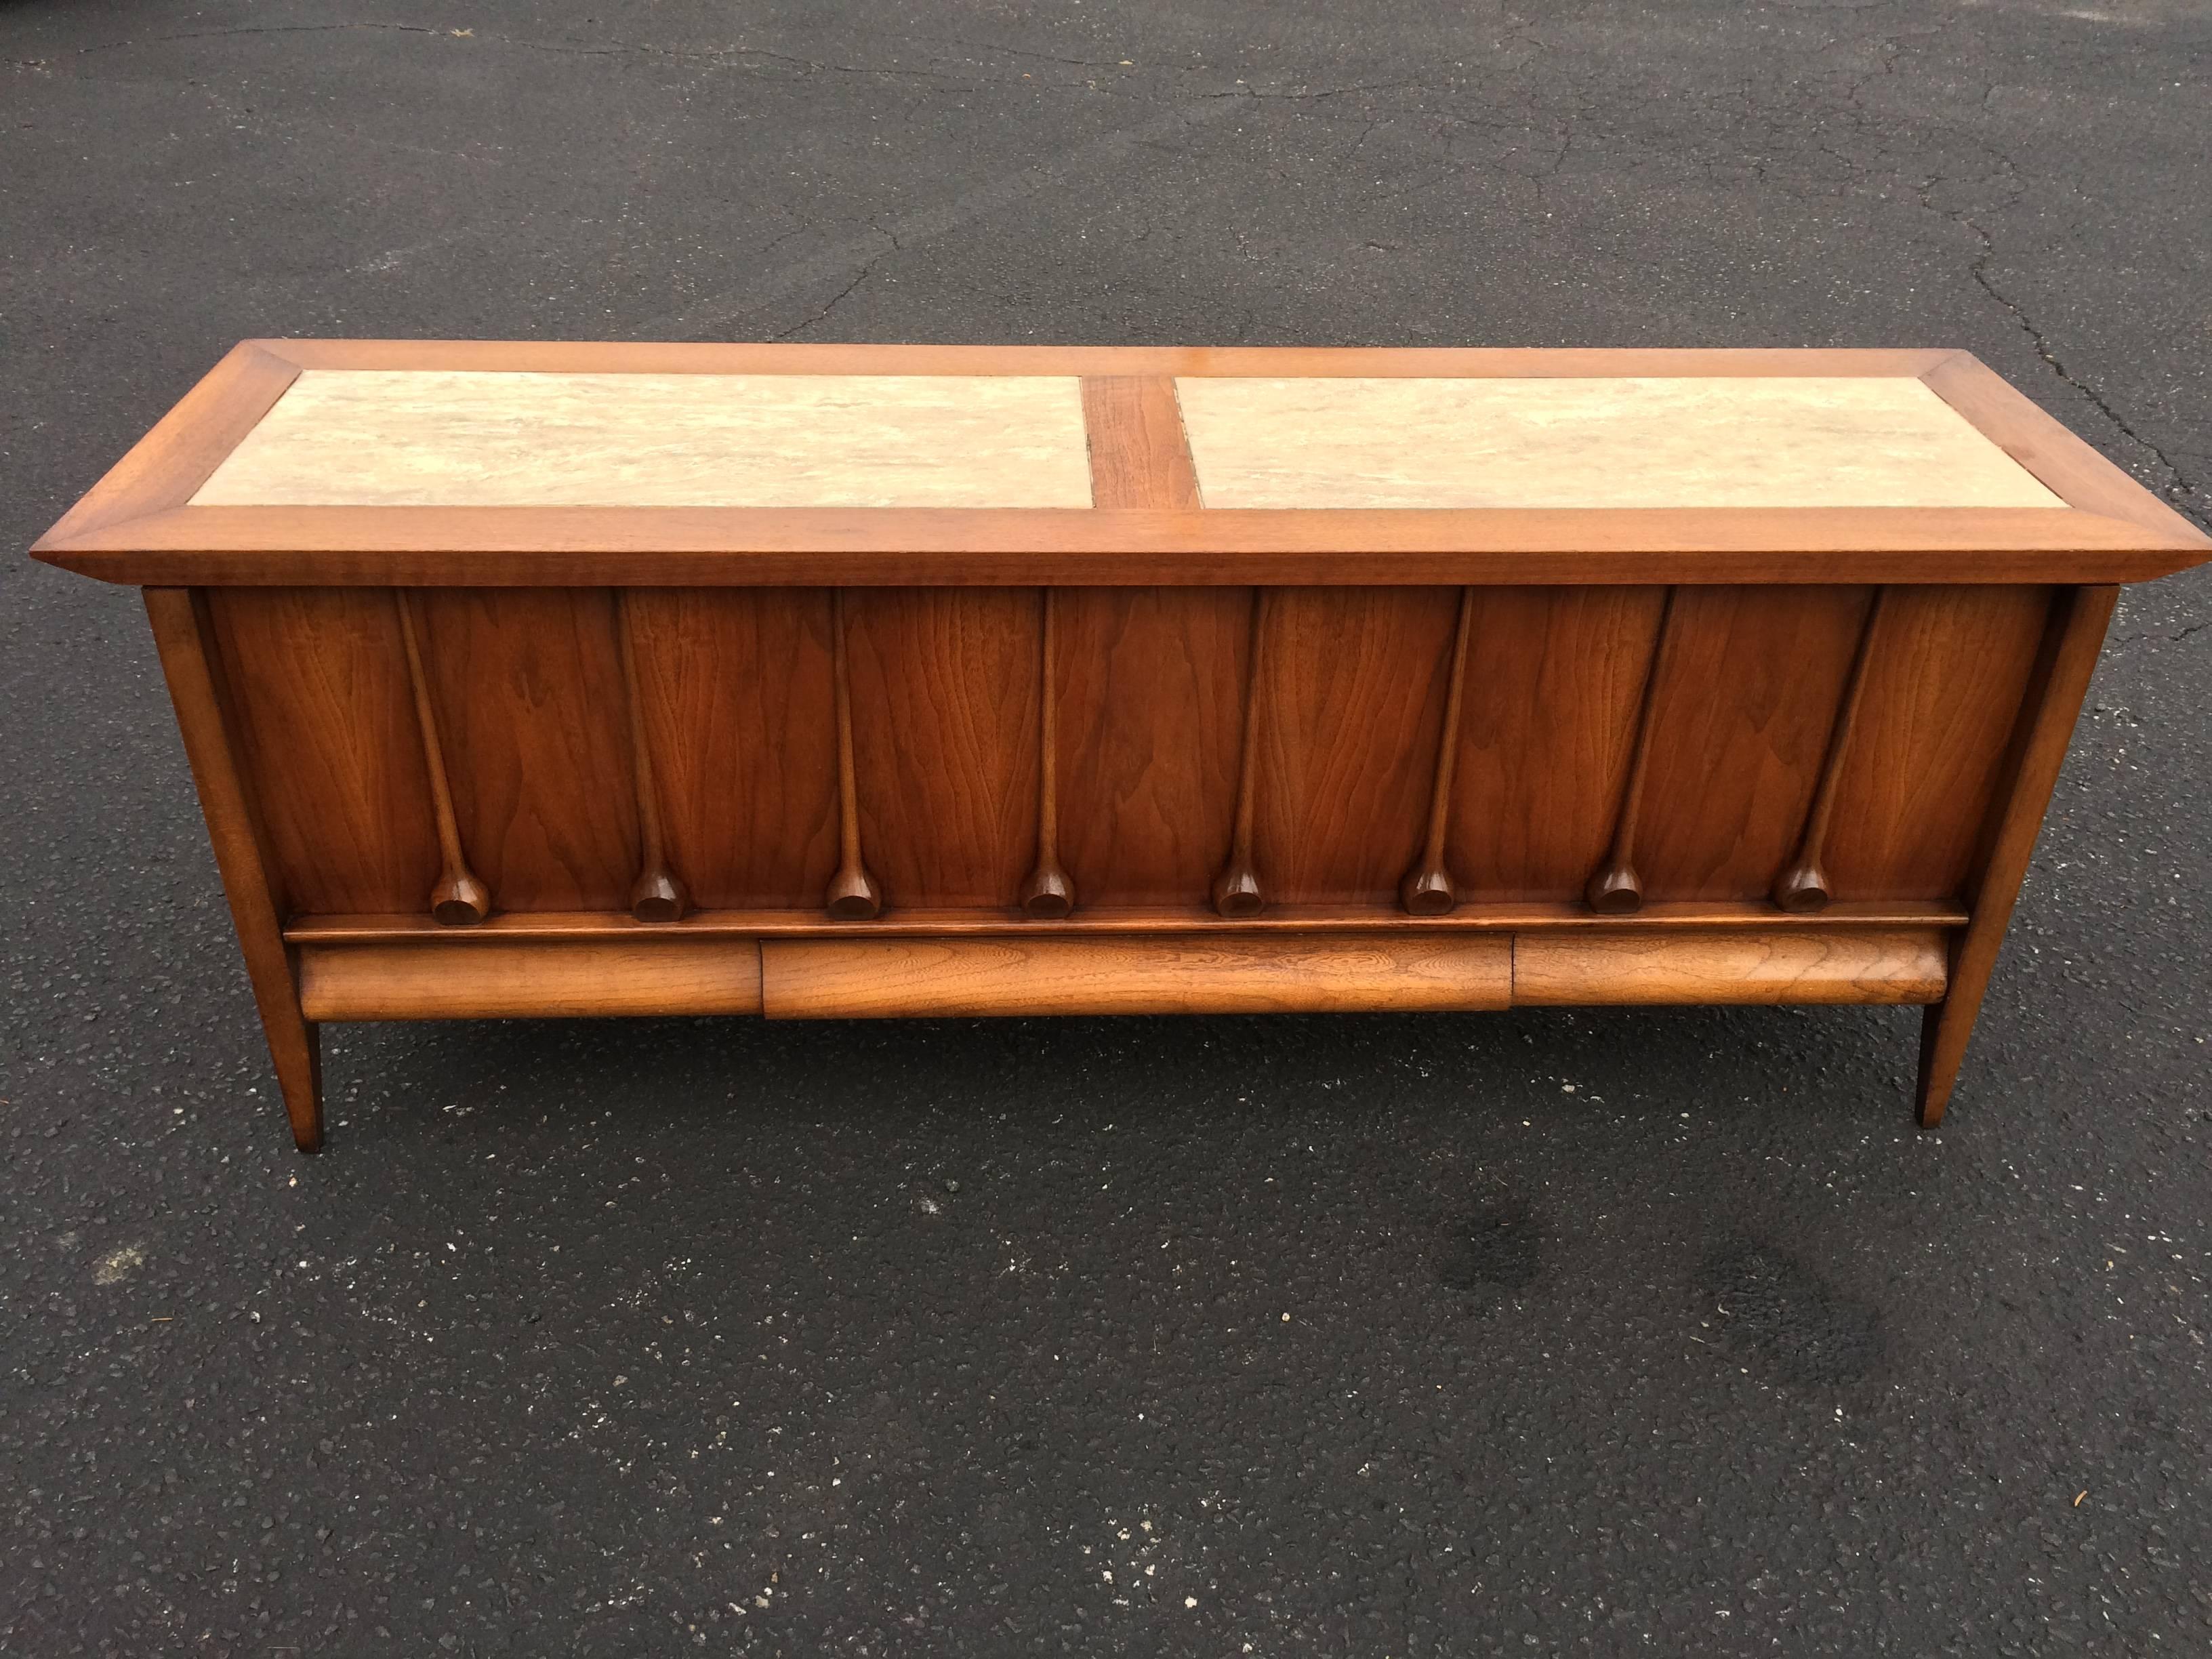 Mid-Century cedar chest by Lane. Fantastic storage to this groovy piece. With an immaculate cedar lined interior and lower drawer for more storage this would fit great at the foot of a bed or in an entryway. Rear side is unfinished.
The top is a